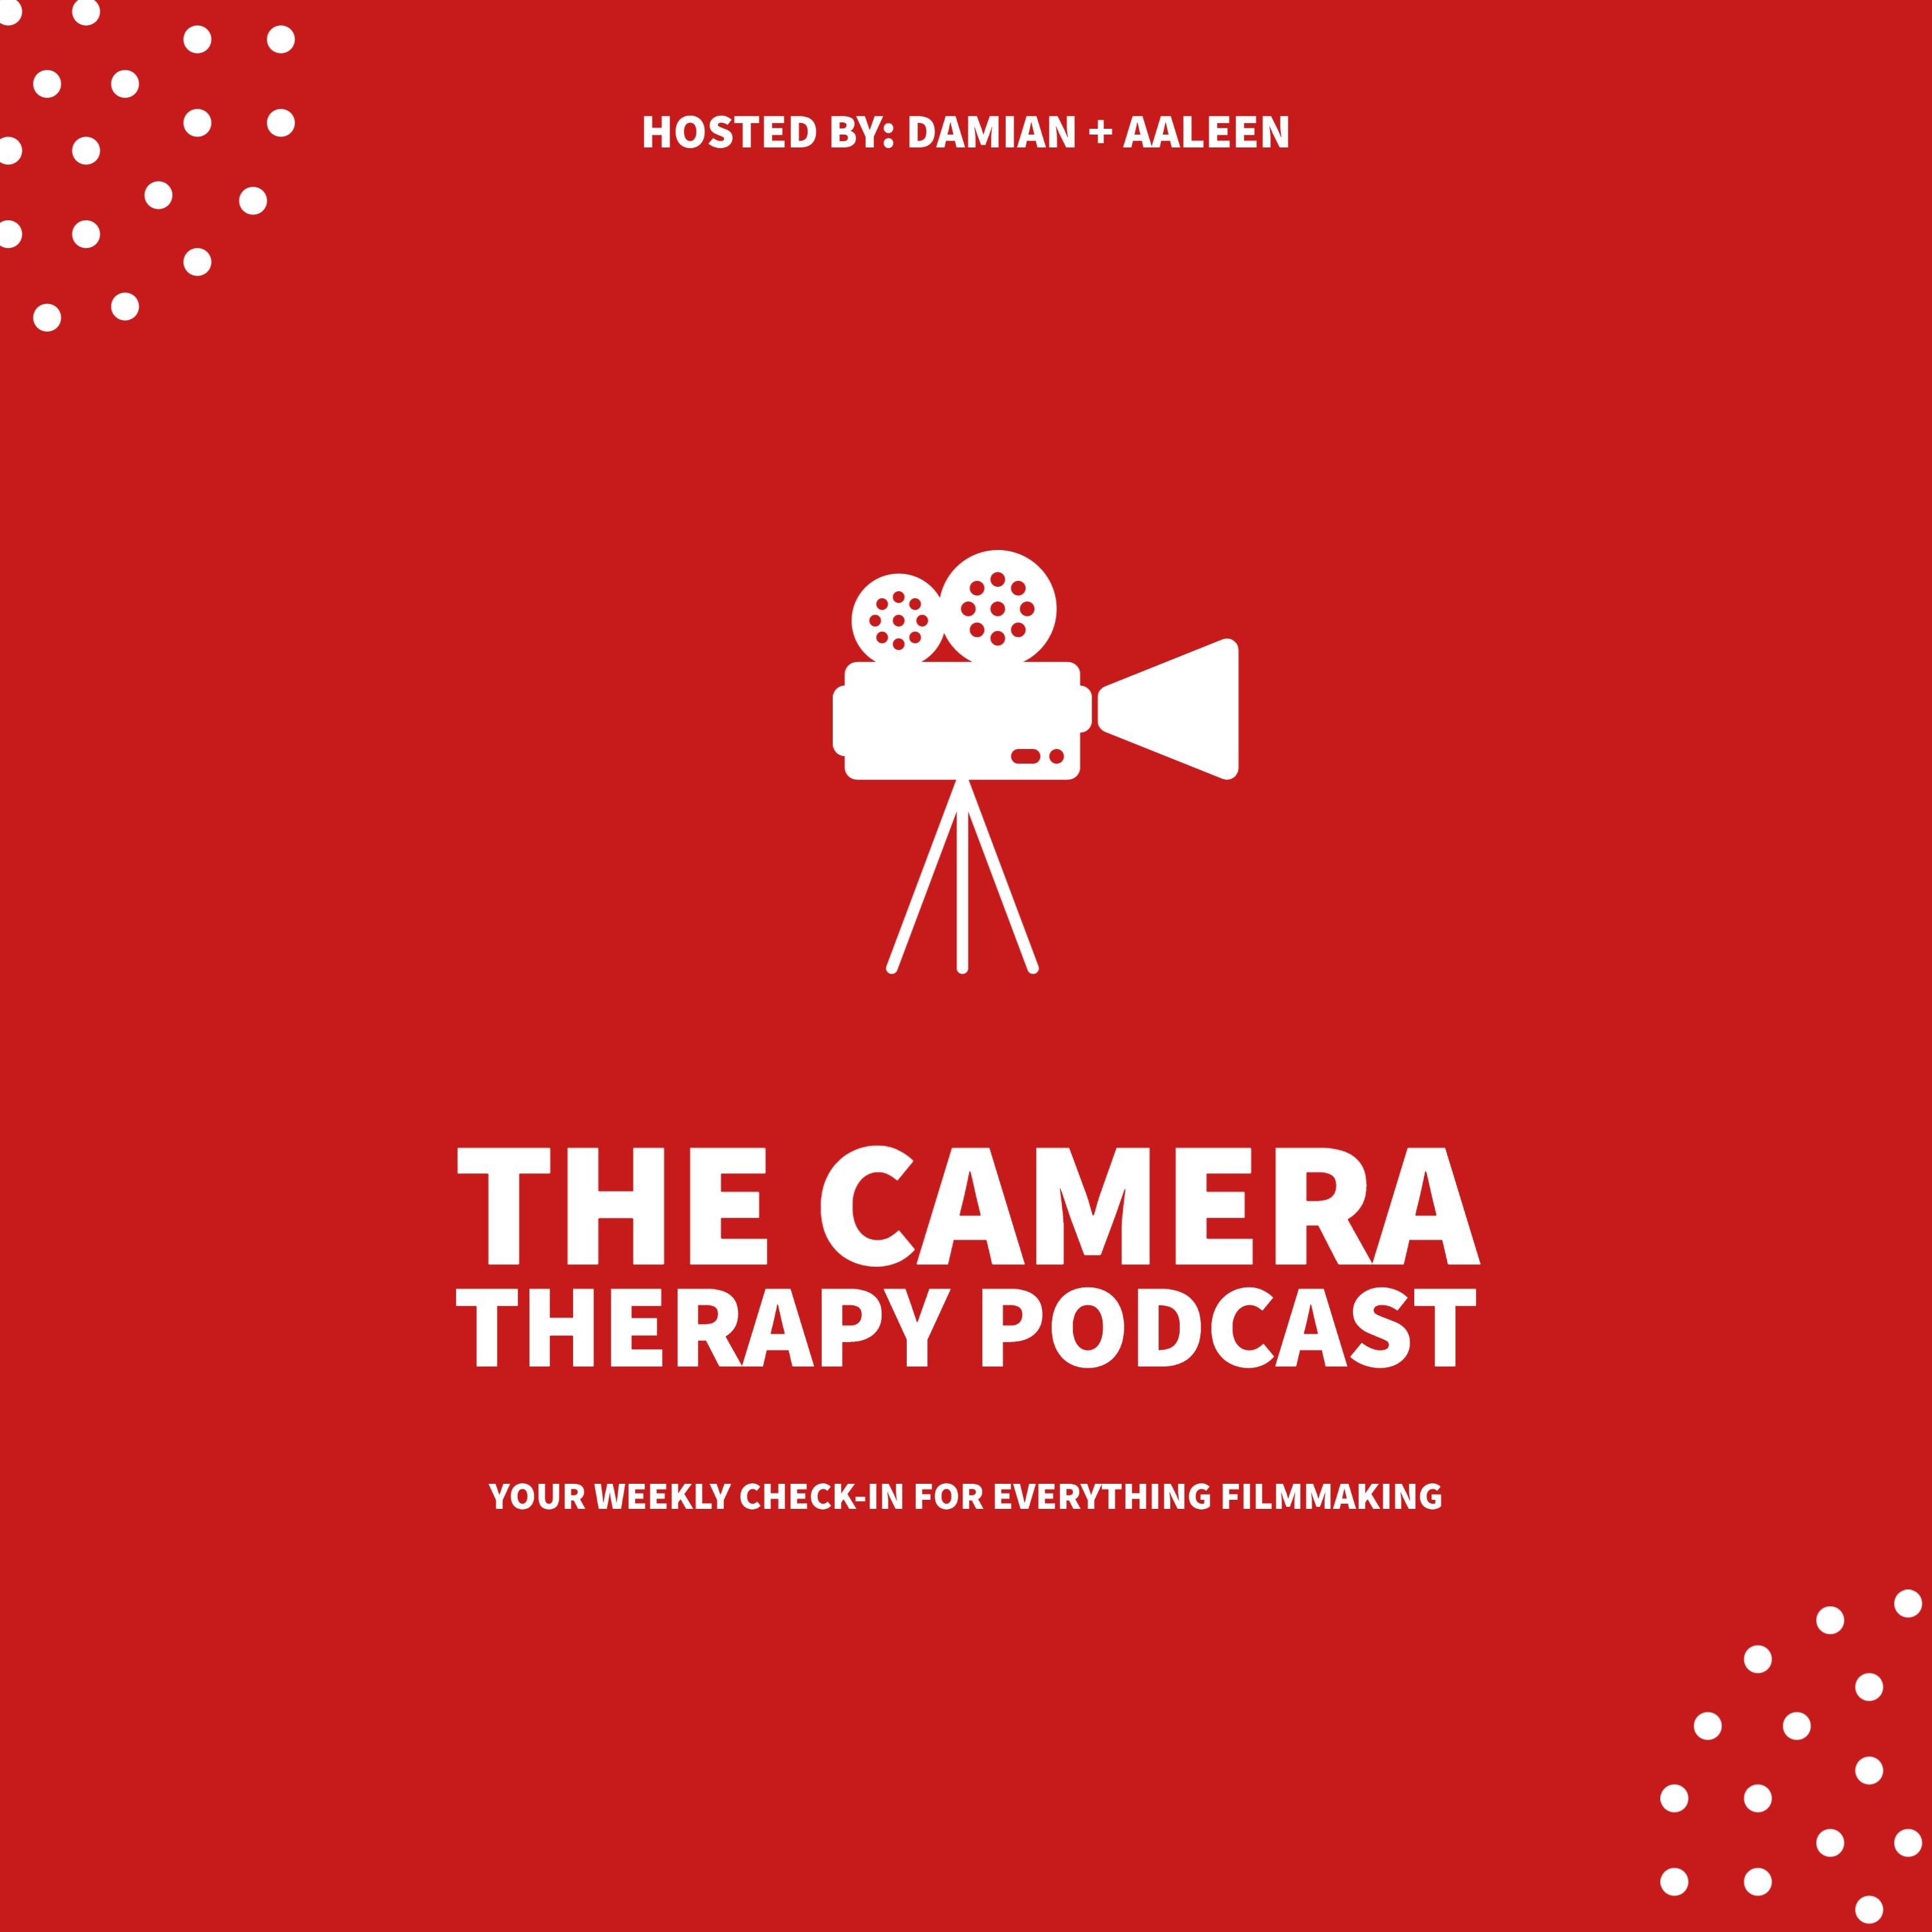 The Camera Therapy Podcast